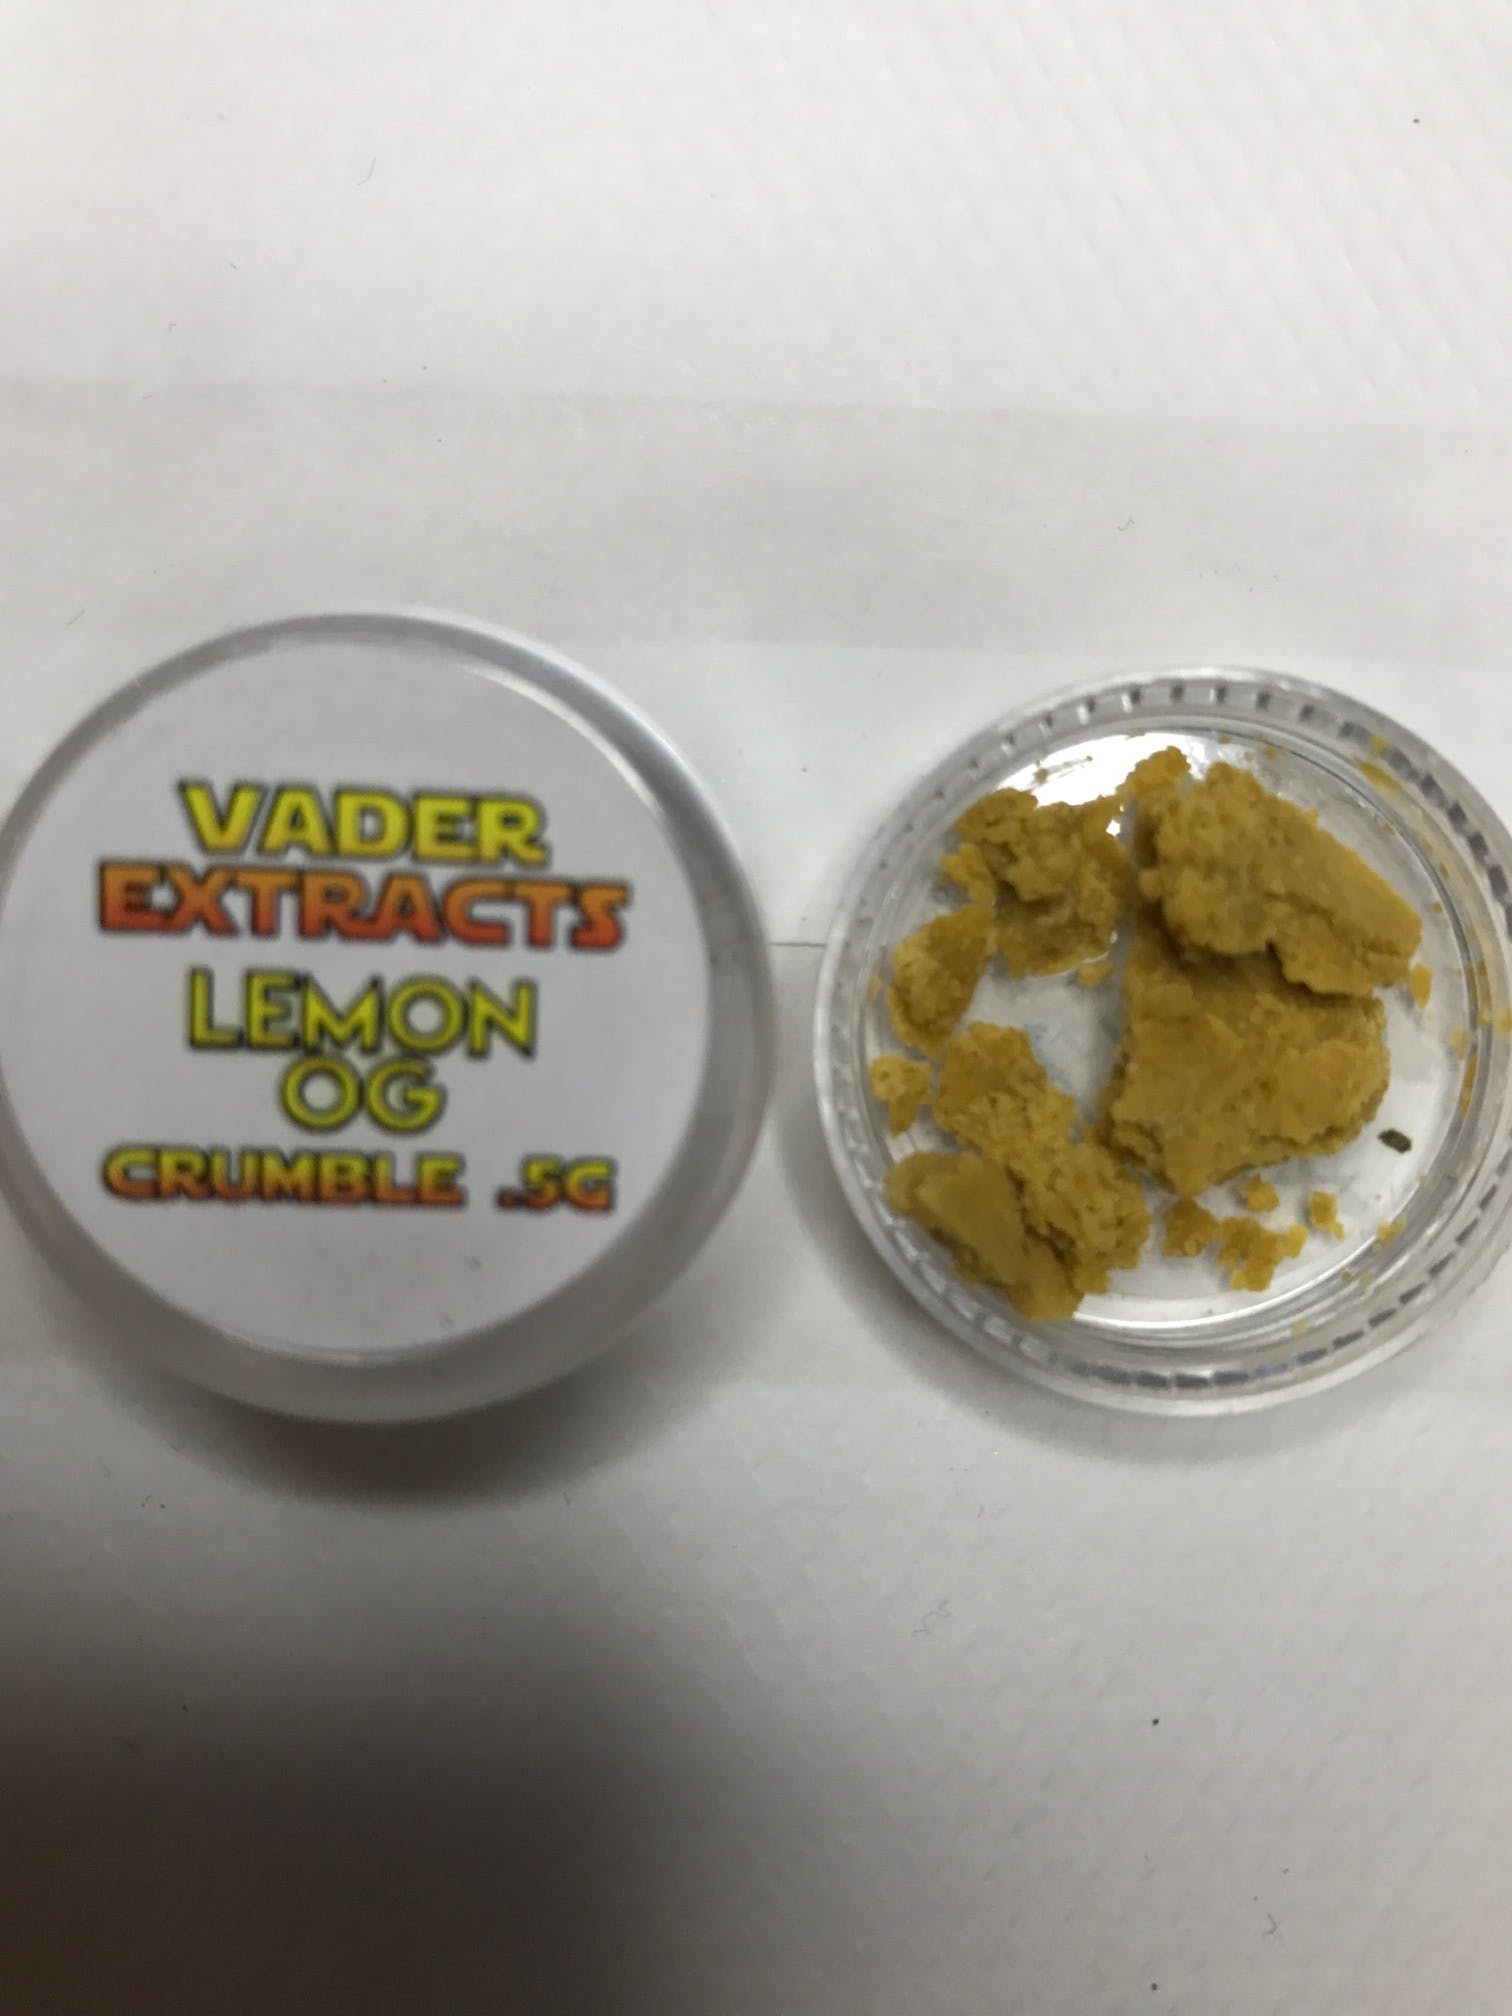 VADER EXTRACTS